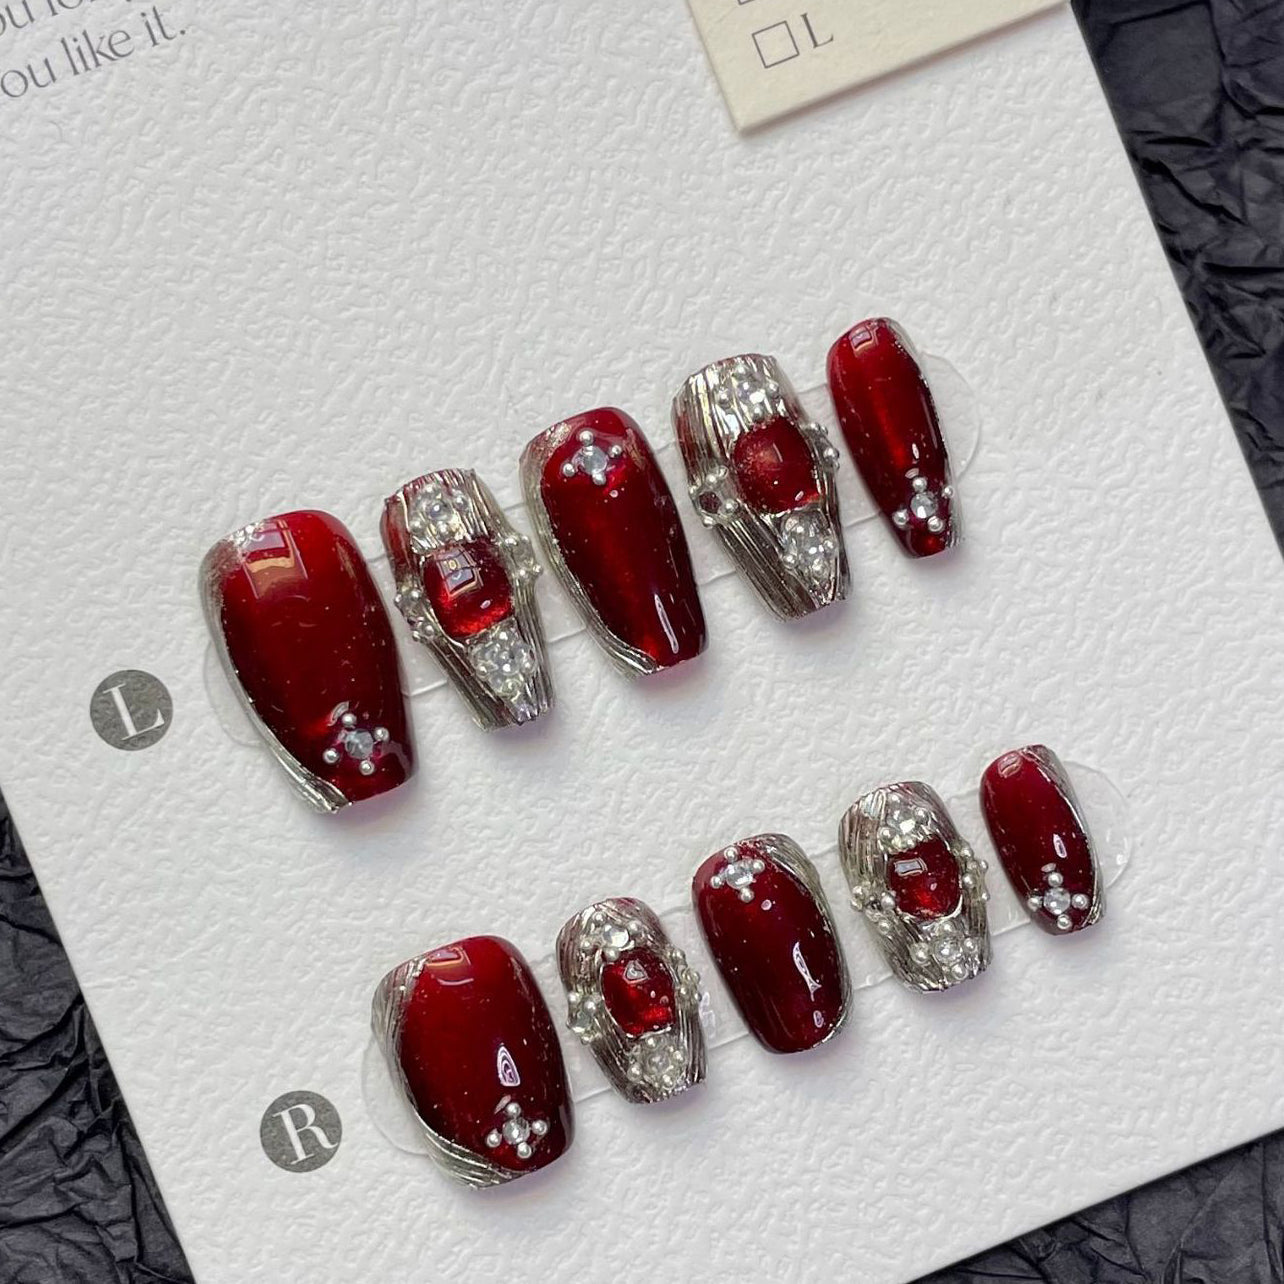 1241/1246 Red BUCCELLATI style press on nails 100% handmade false nails red sliver